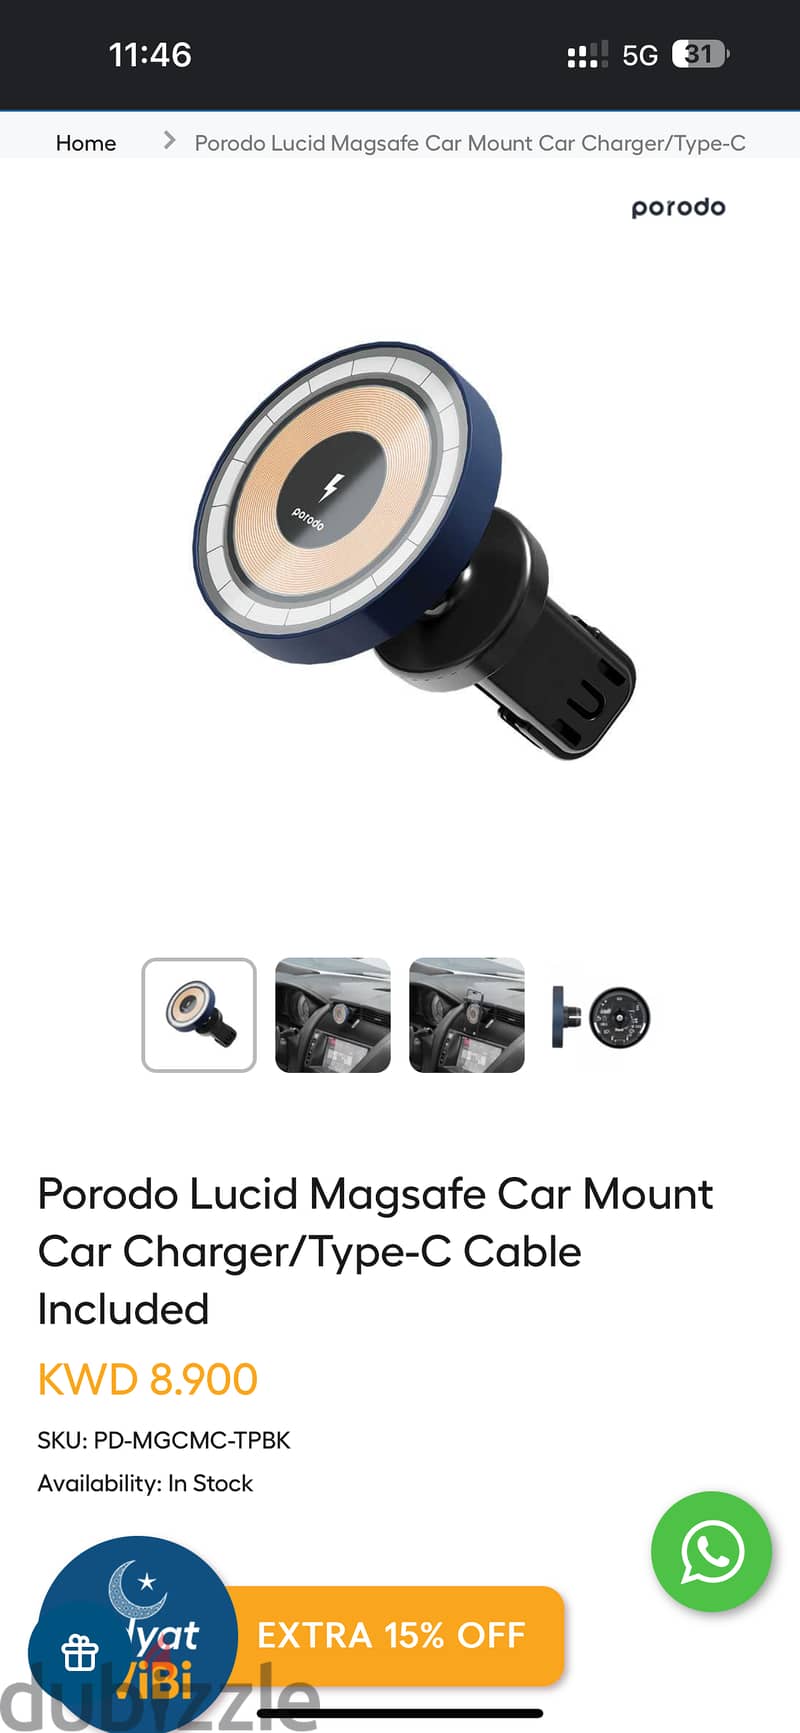 Porodo Lucid Magsafe Car Mount Car Charger / Type-C Cable Included 4